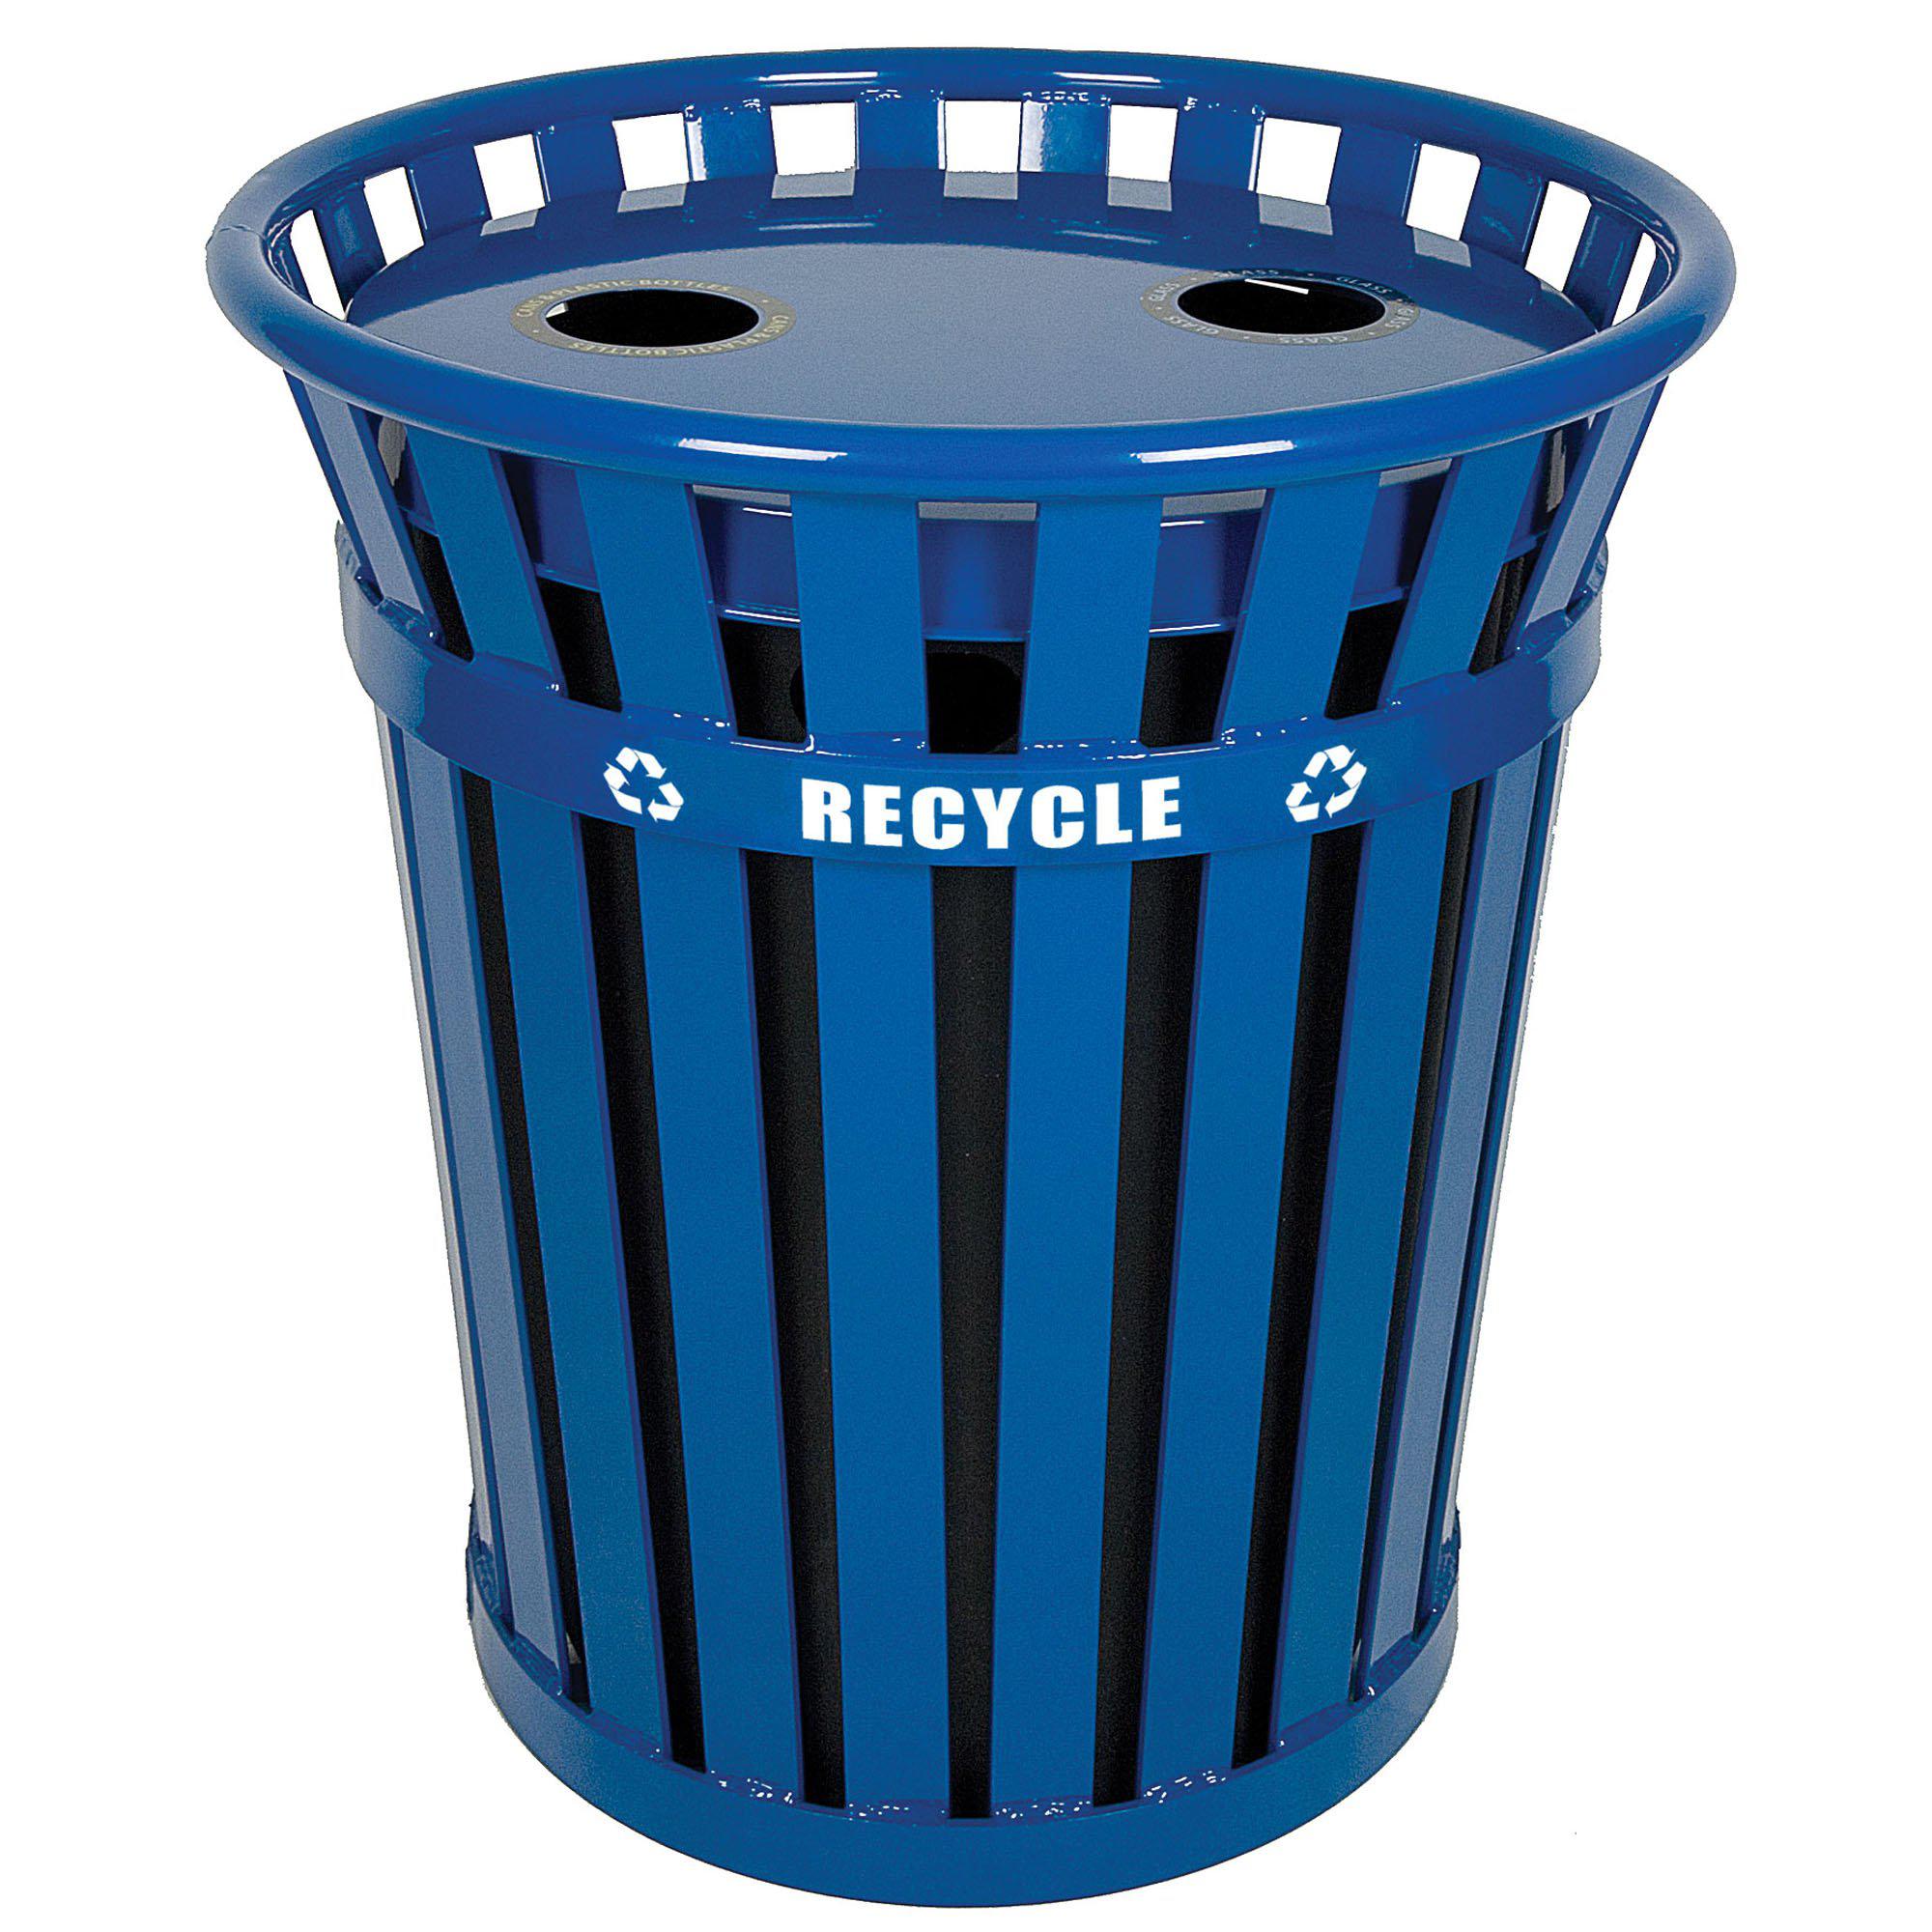 Wydman Collection Heavy Duty Slatted Outdoor Recycling Receptacle with Flat Top Lid, 36-Gallon Capacity